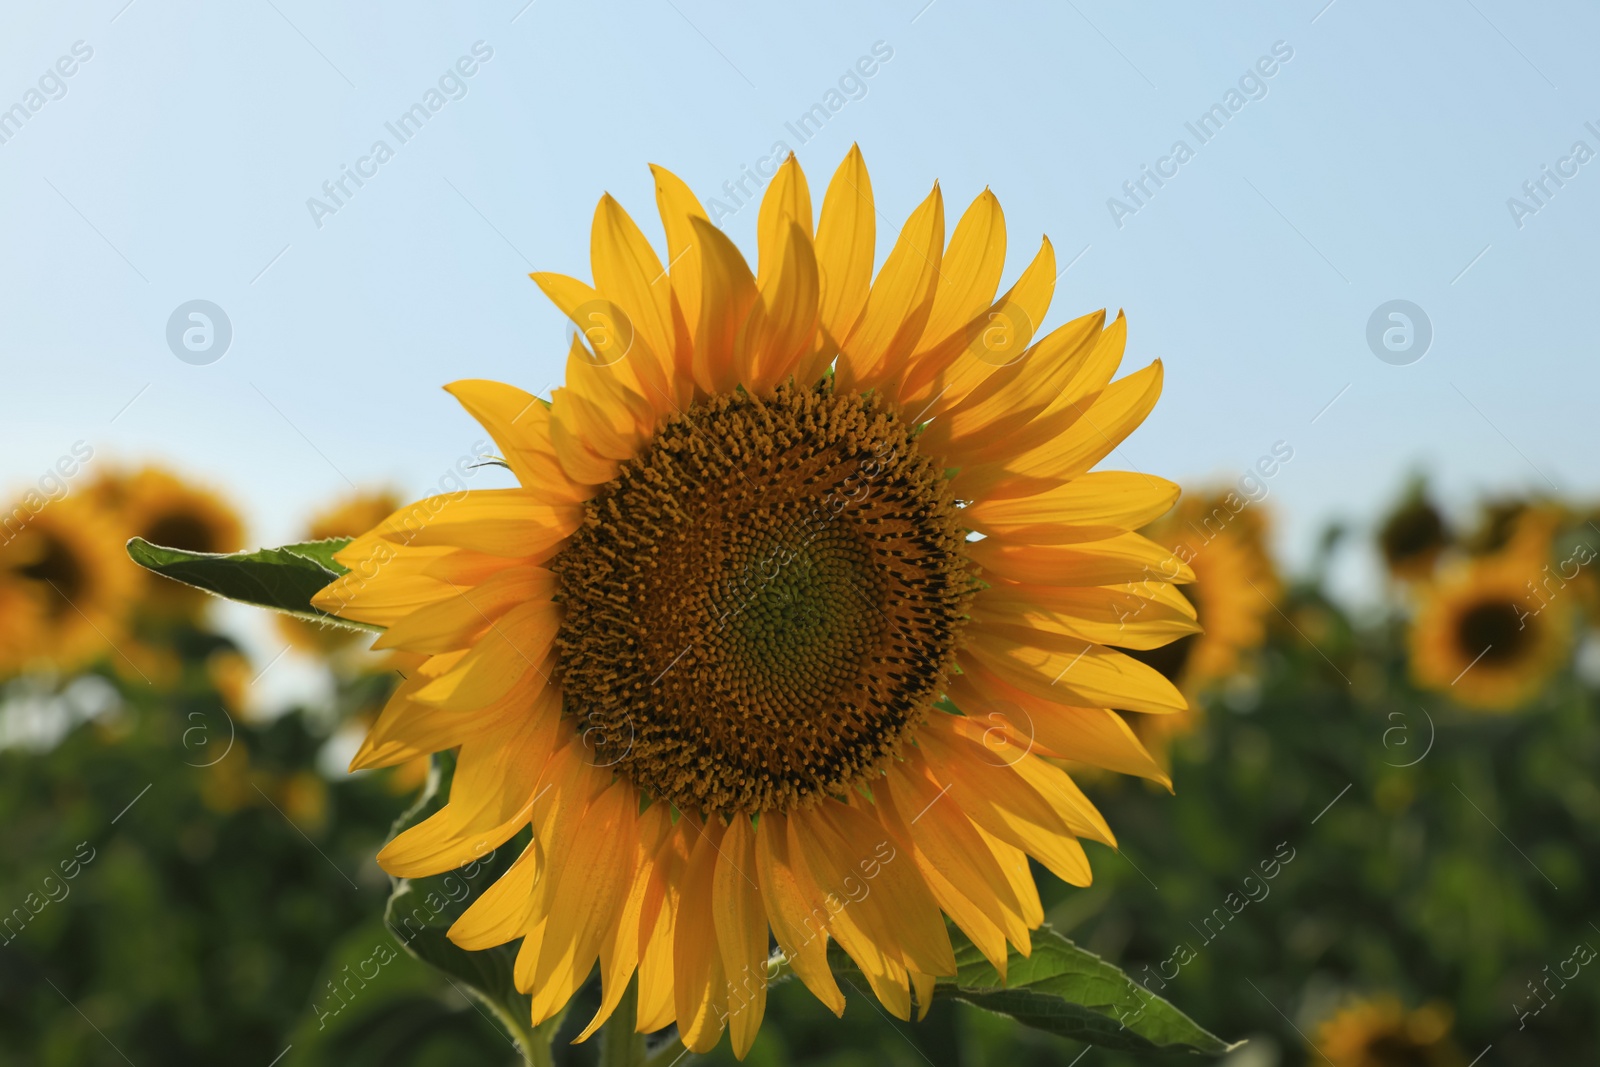 Photo of Sunflower growing in field outdoors on sunny day